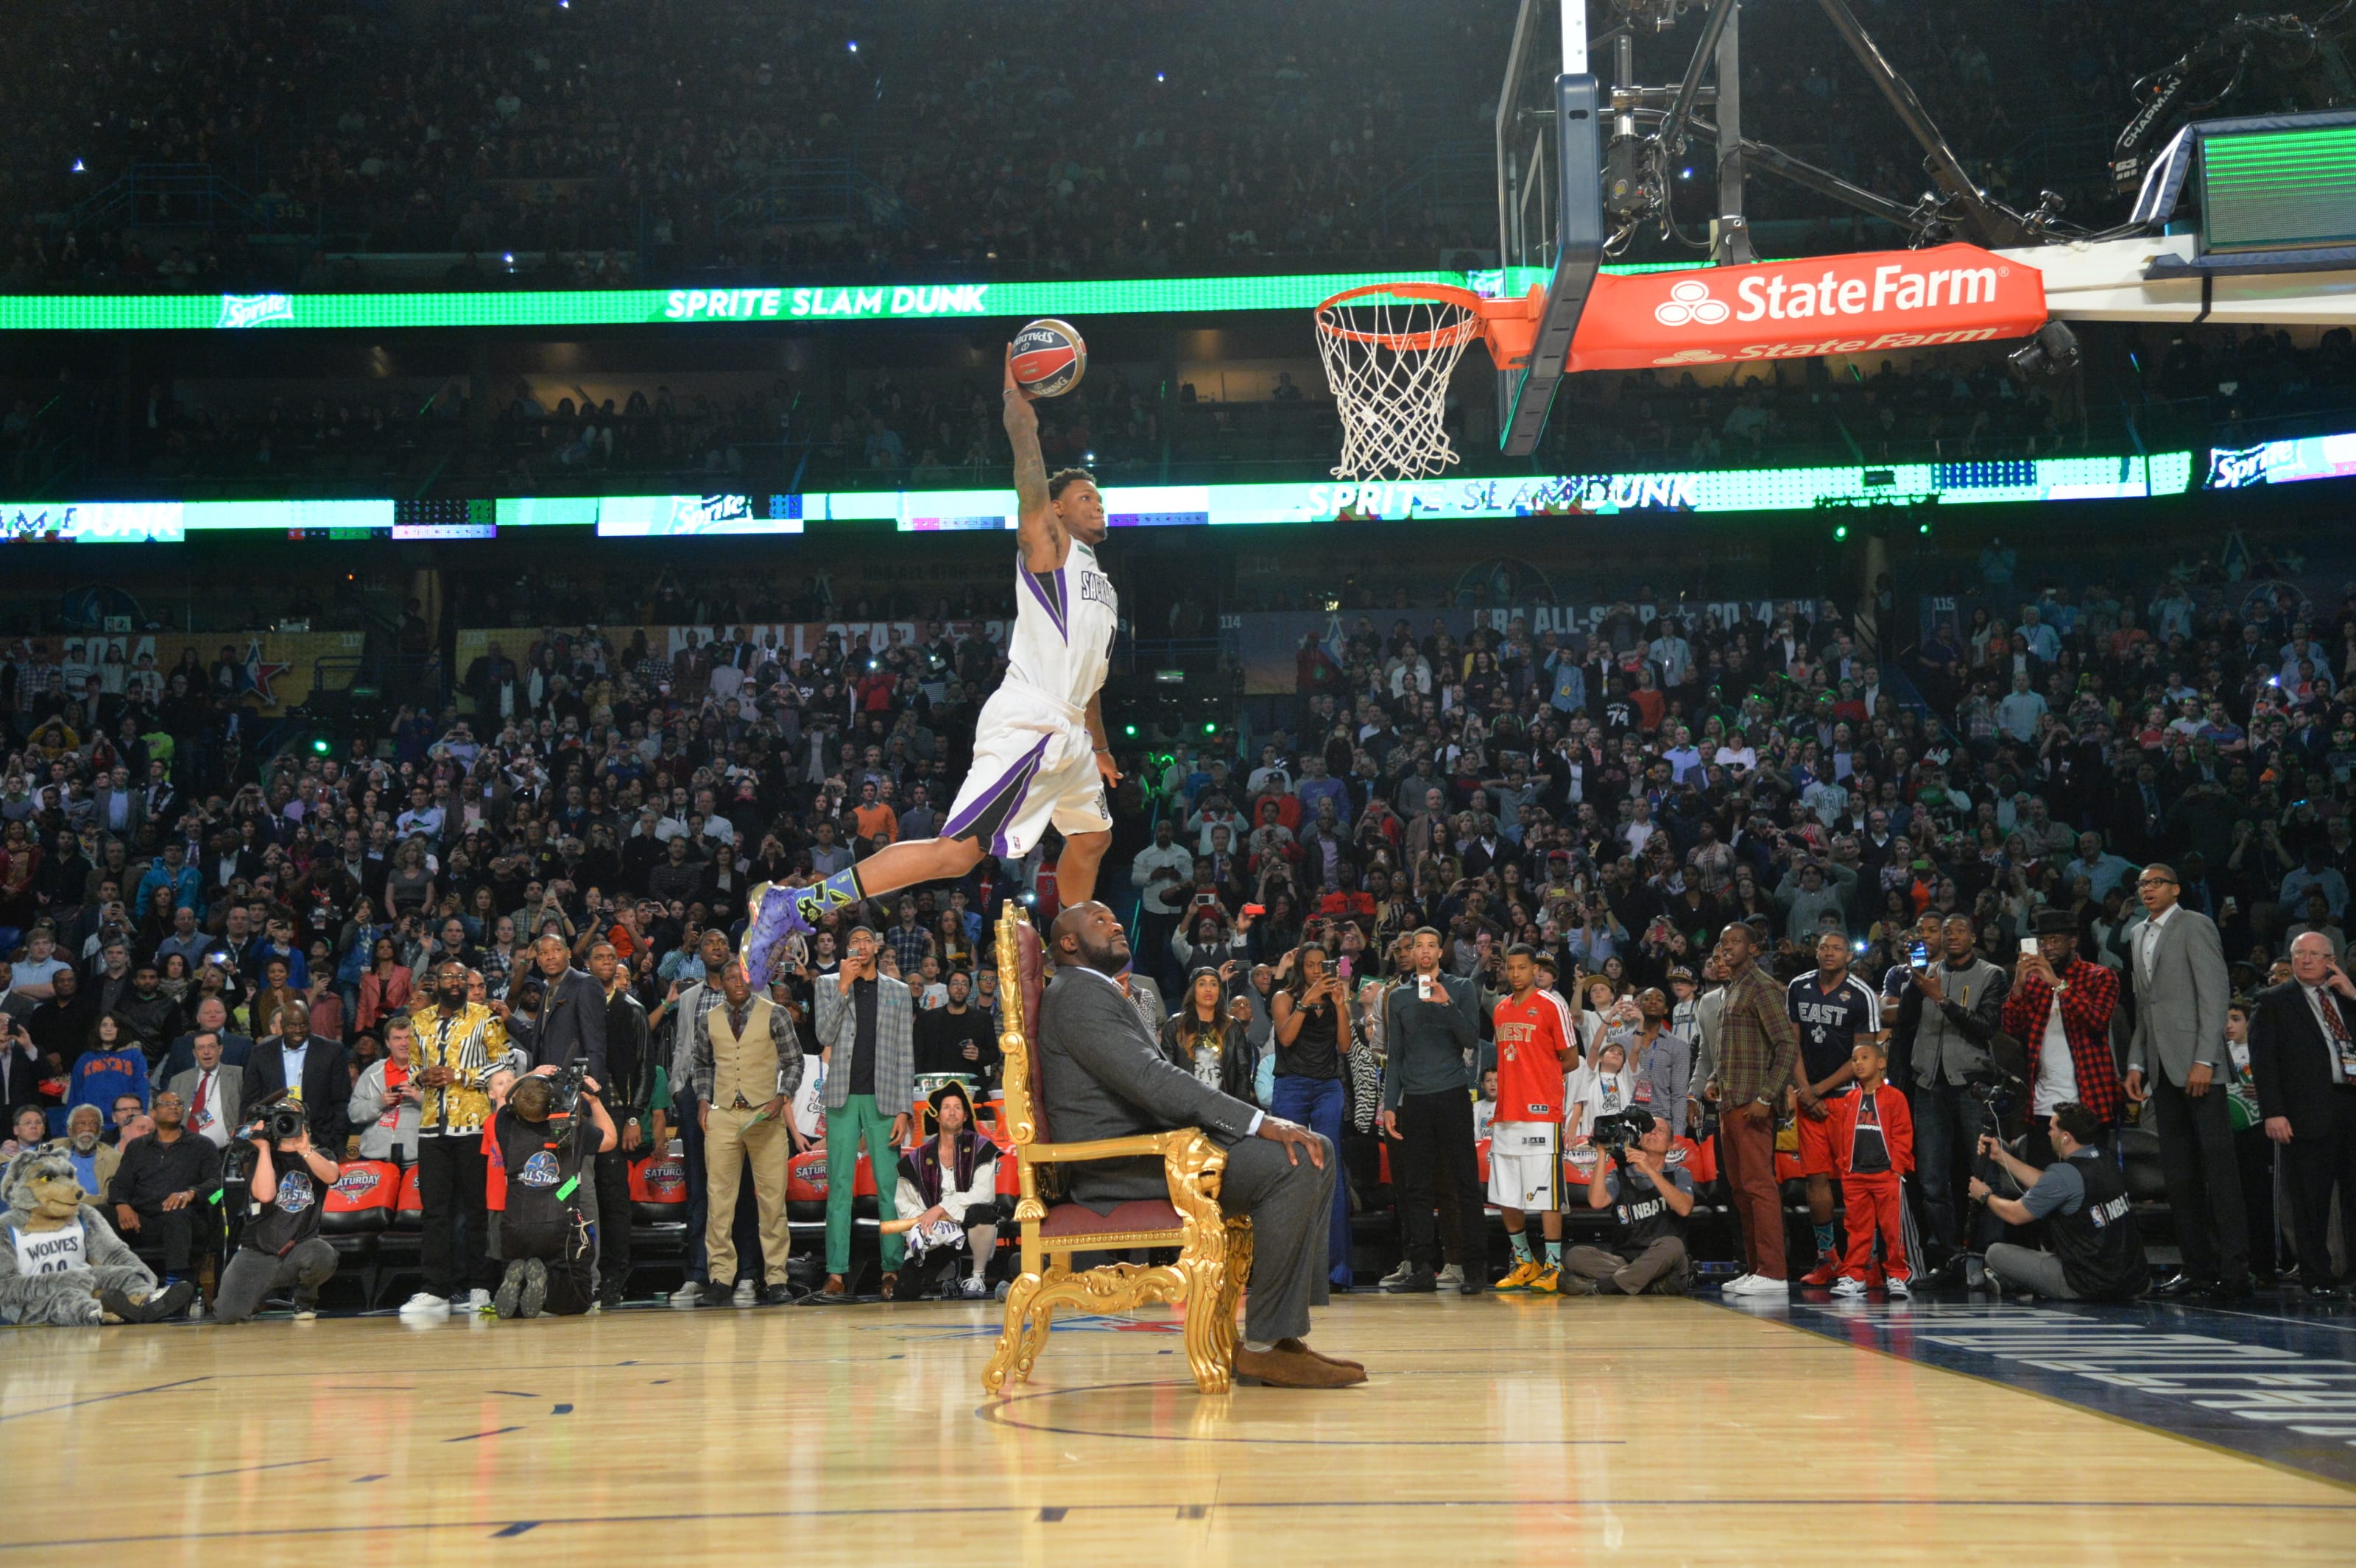 From slam dunks to Shaq's throne: NBA All-Star weekend in clips, NBA